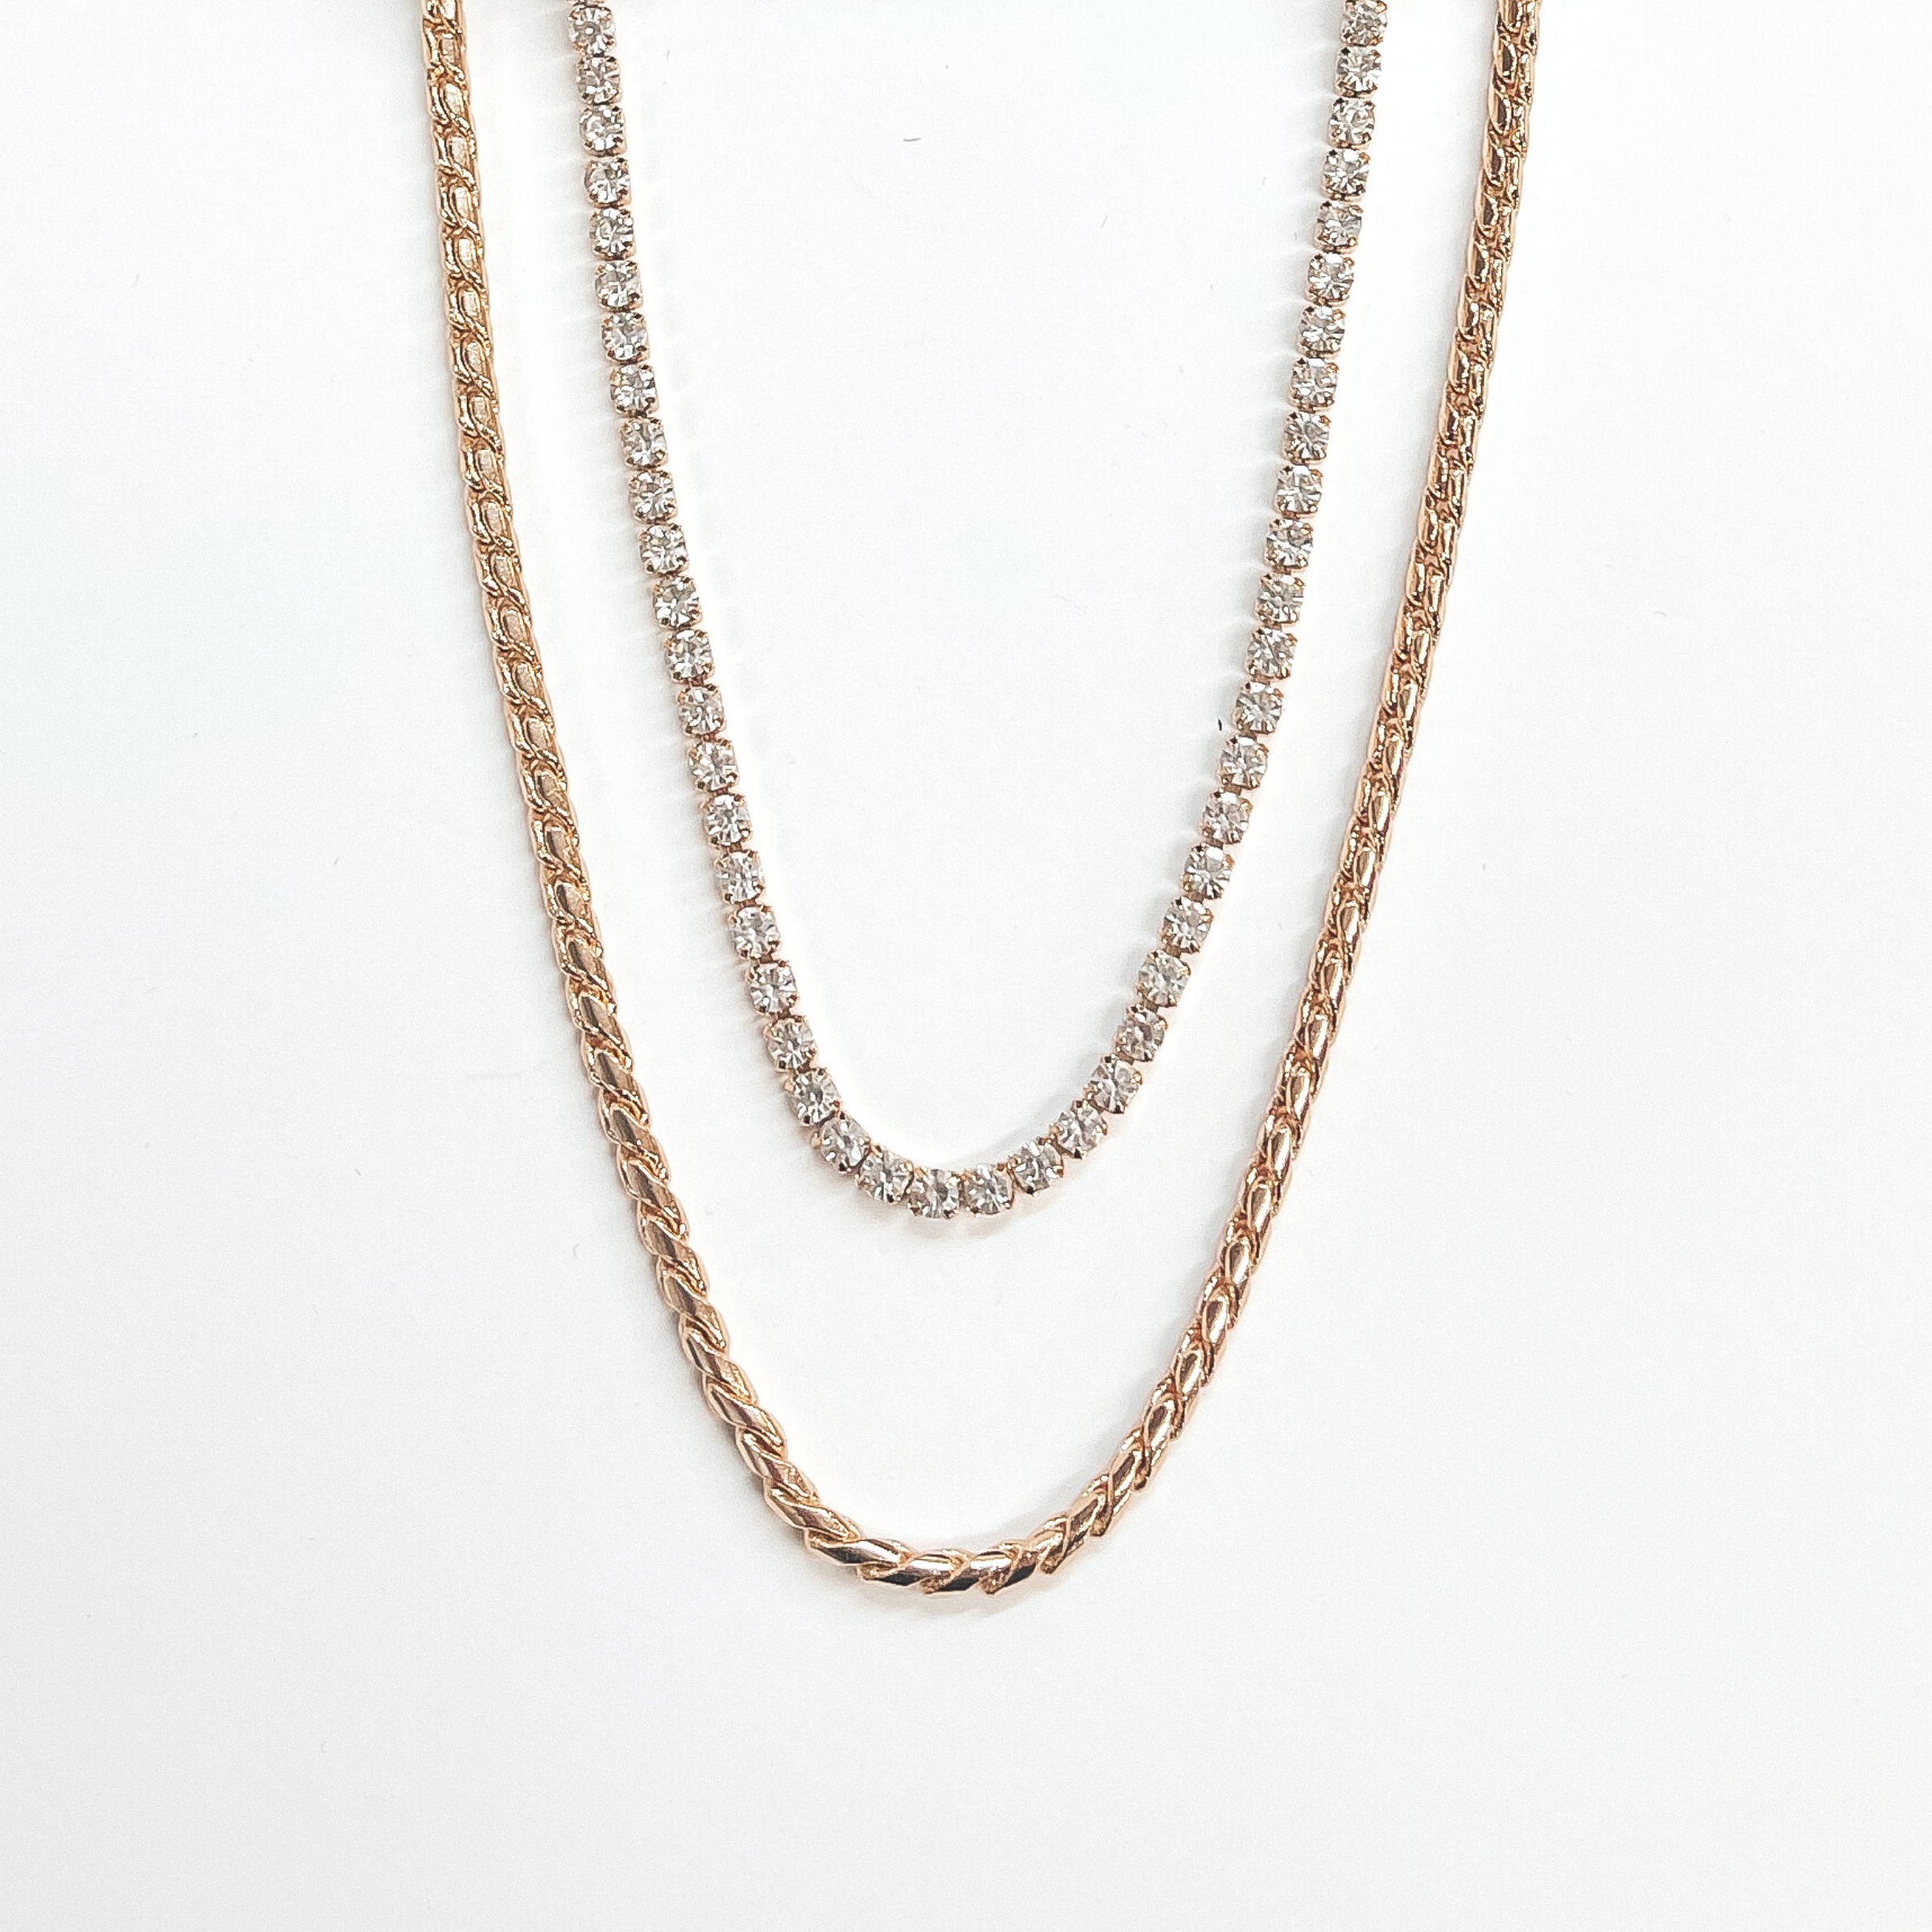 Double Layered Braid Chain Necklace with Rhinestones in Gold - Giddy Up Glamour Boutique